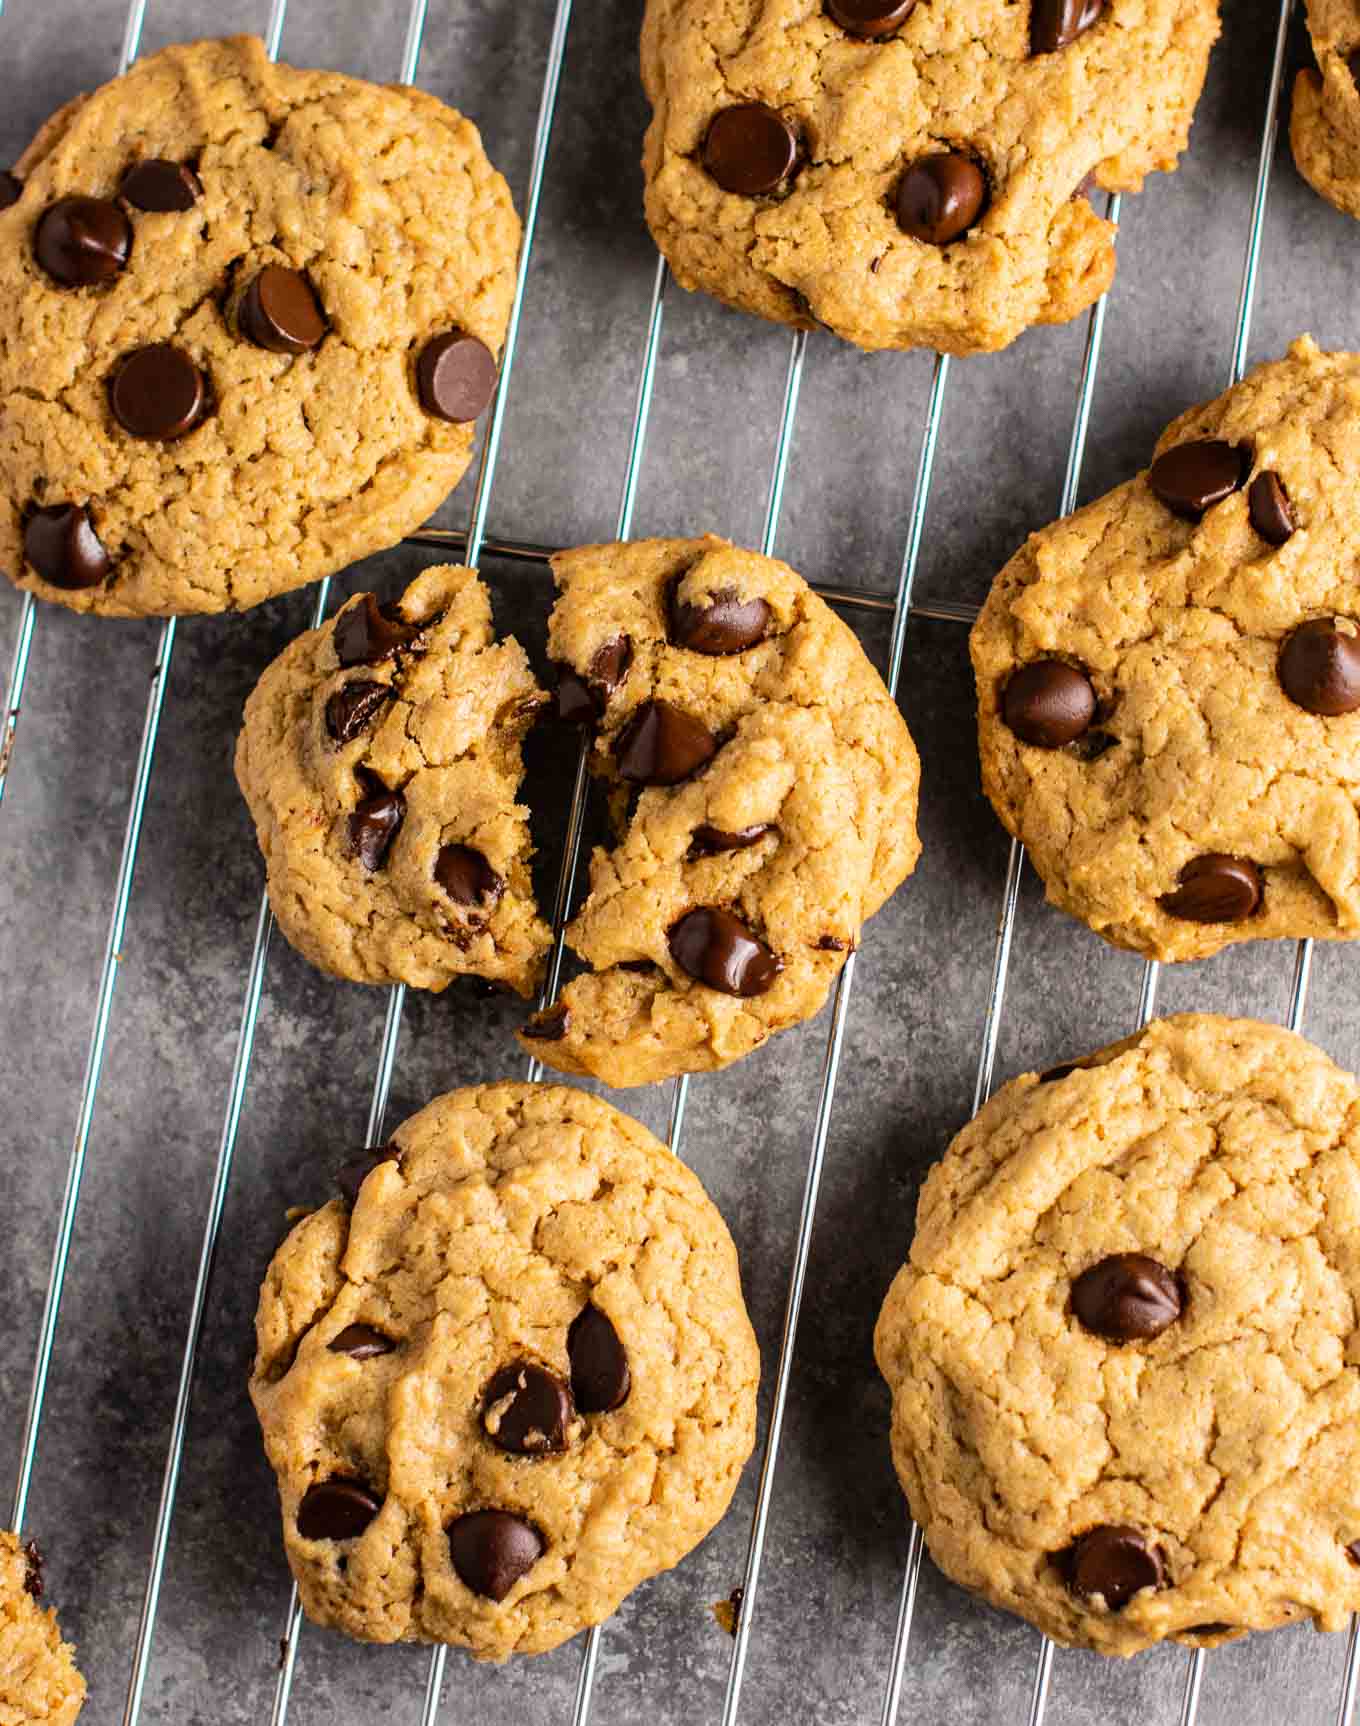 best vegan recipes - The best vegan chocolate chip cookies recipe - so chewy and rich, you would never guess they don't have any eggs or dairy in them! #vegan #chocolatechipcookies #dessert #dairyfree #eggless #cookies #healthy